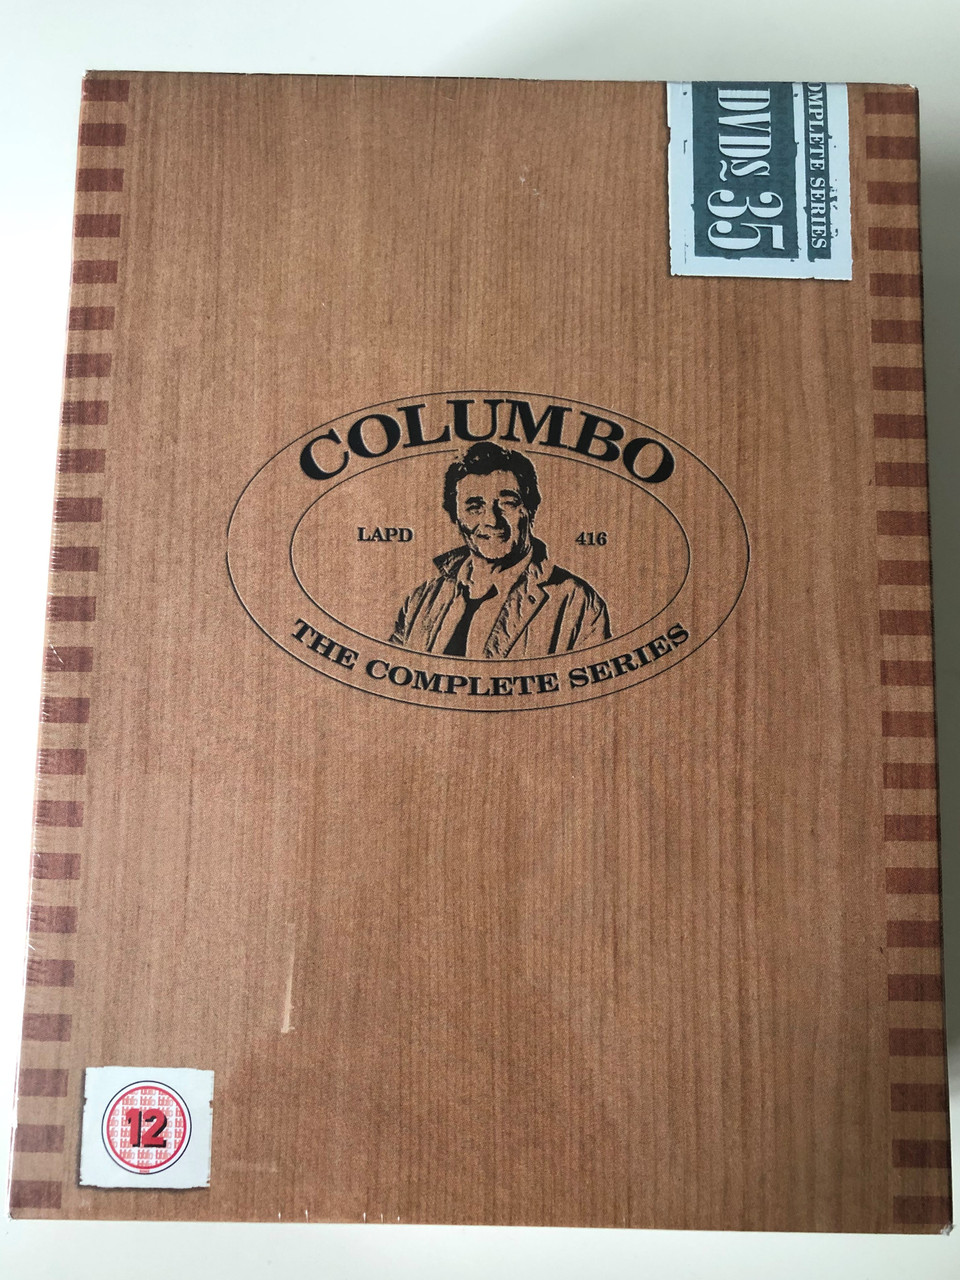 Columbo - The Complete Series 35 DVDs / Created by Richard Levinson,  William Link / Starring: Peter Falk / Sealed DVD Pack - Seasons 1 - 10.2 -  bibleinmylanguage